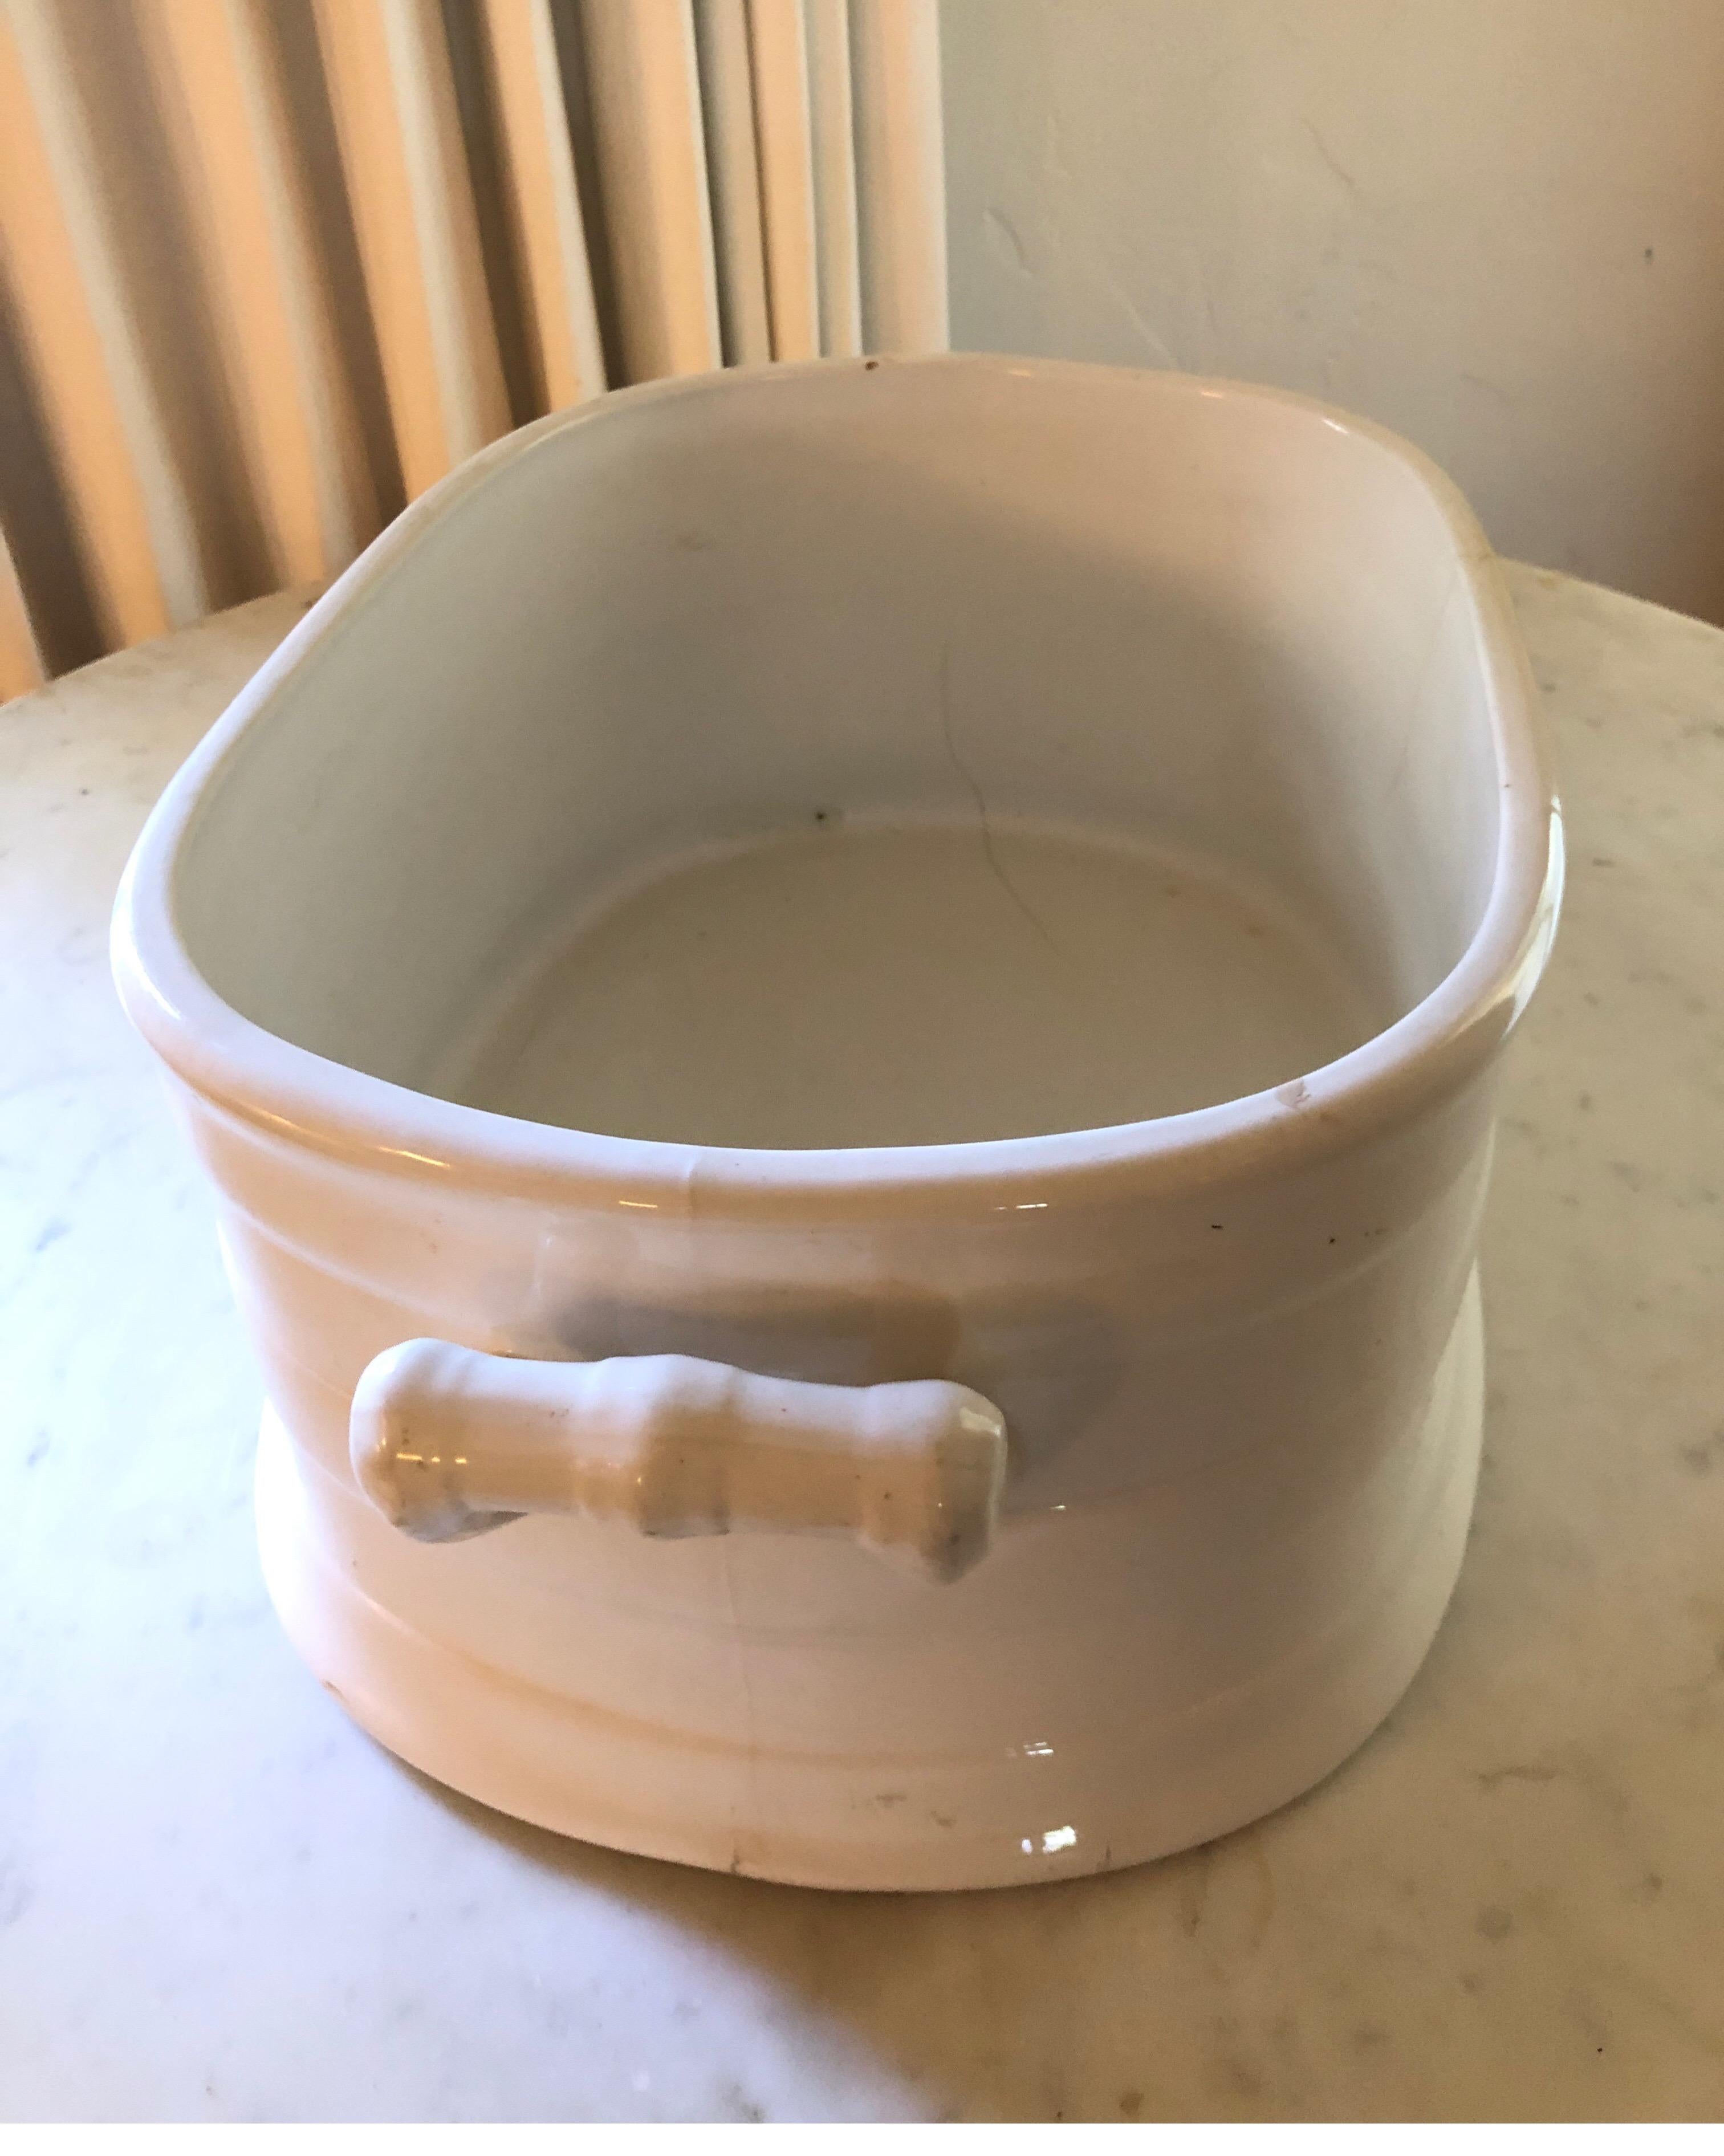 European Large White French Porcelain Champagne Cooler/Ice Bucket/Planter with Handles